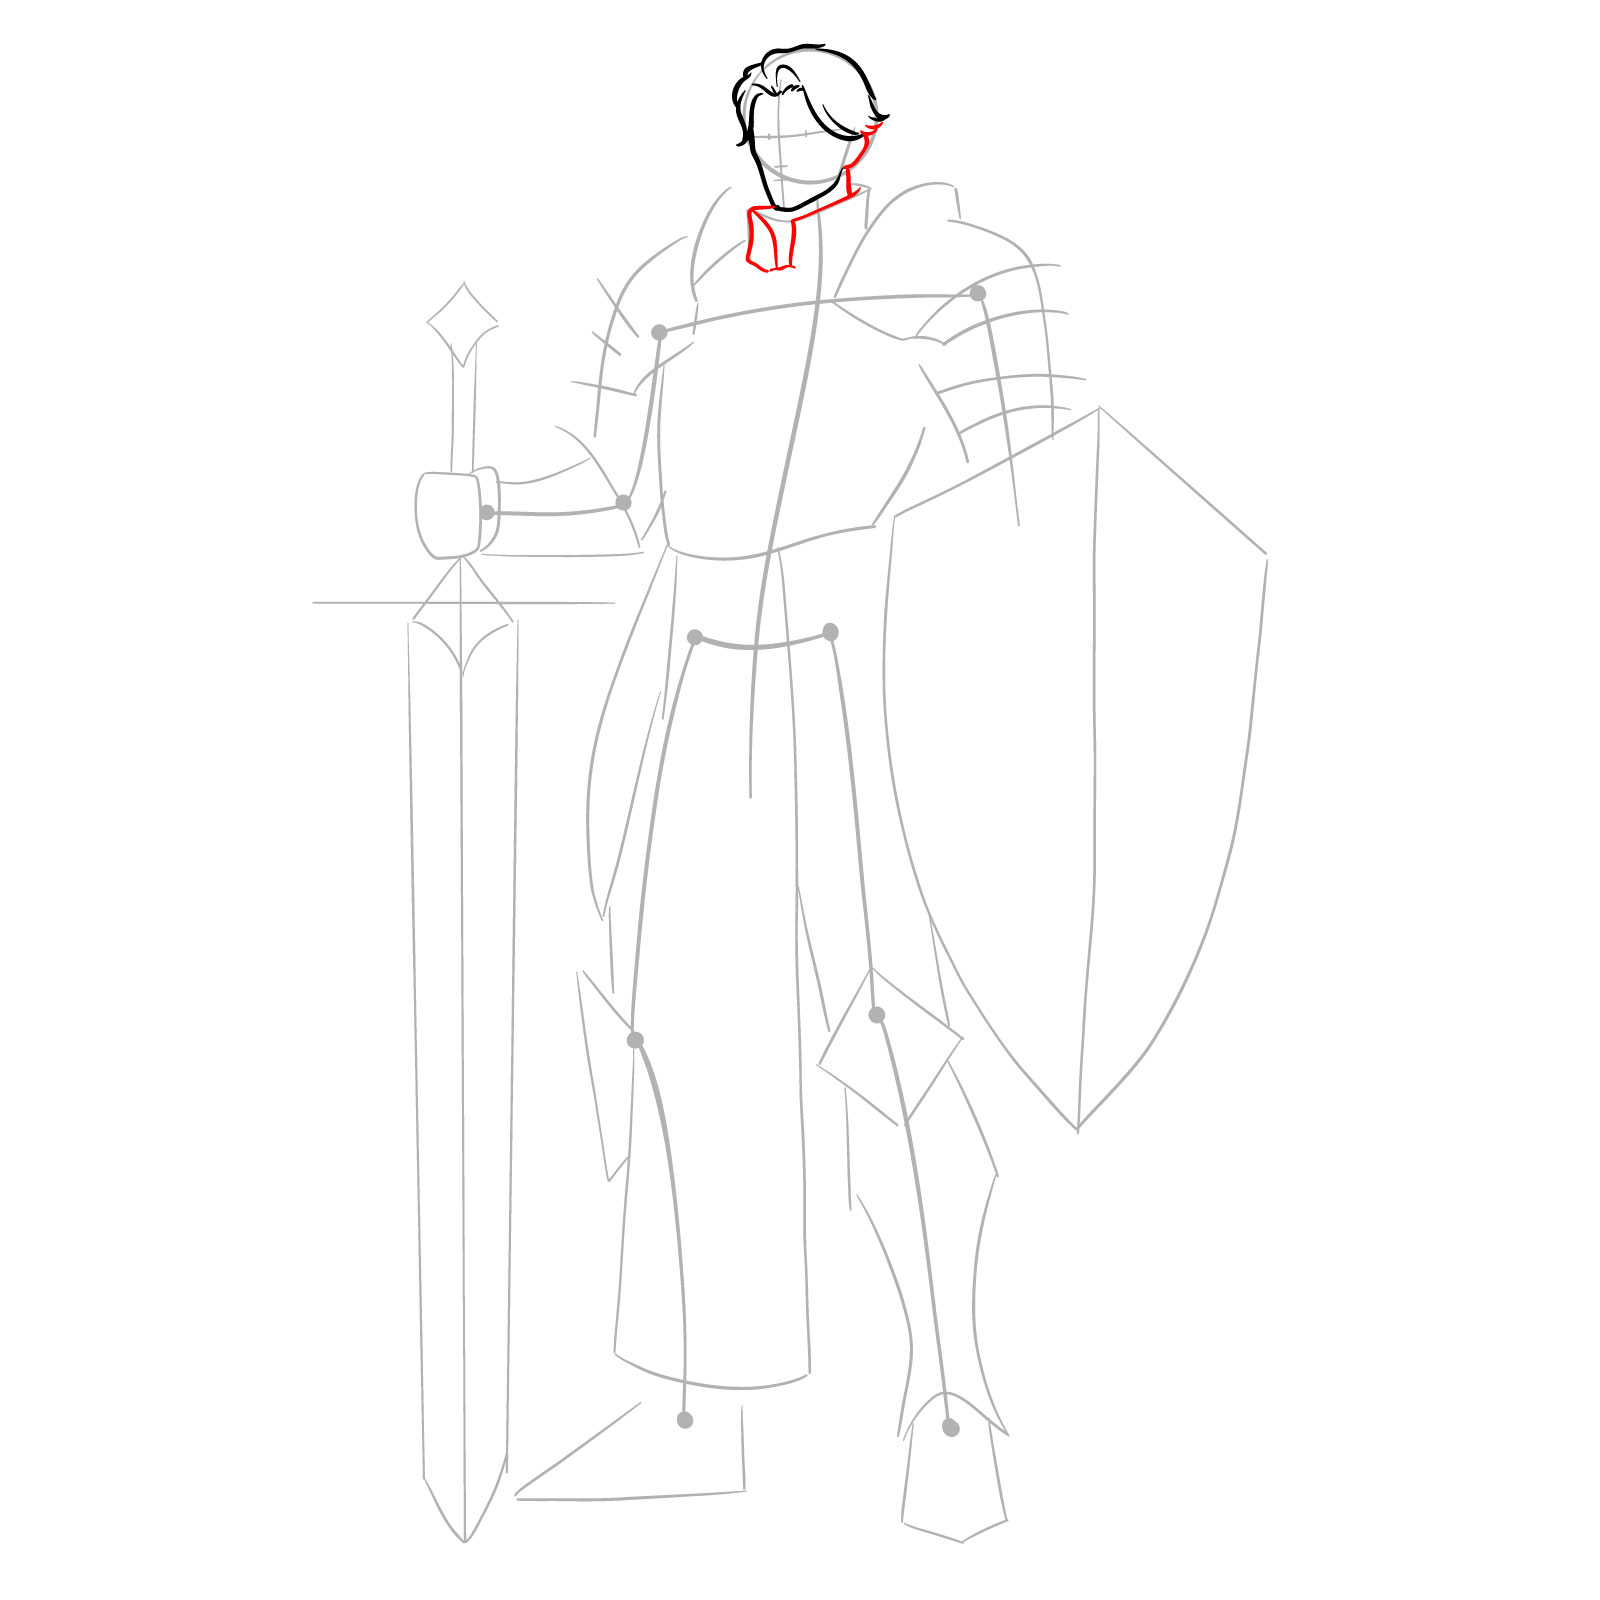 Drawing the ear, neck, and neck part of the armor for the paladin - step 06